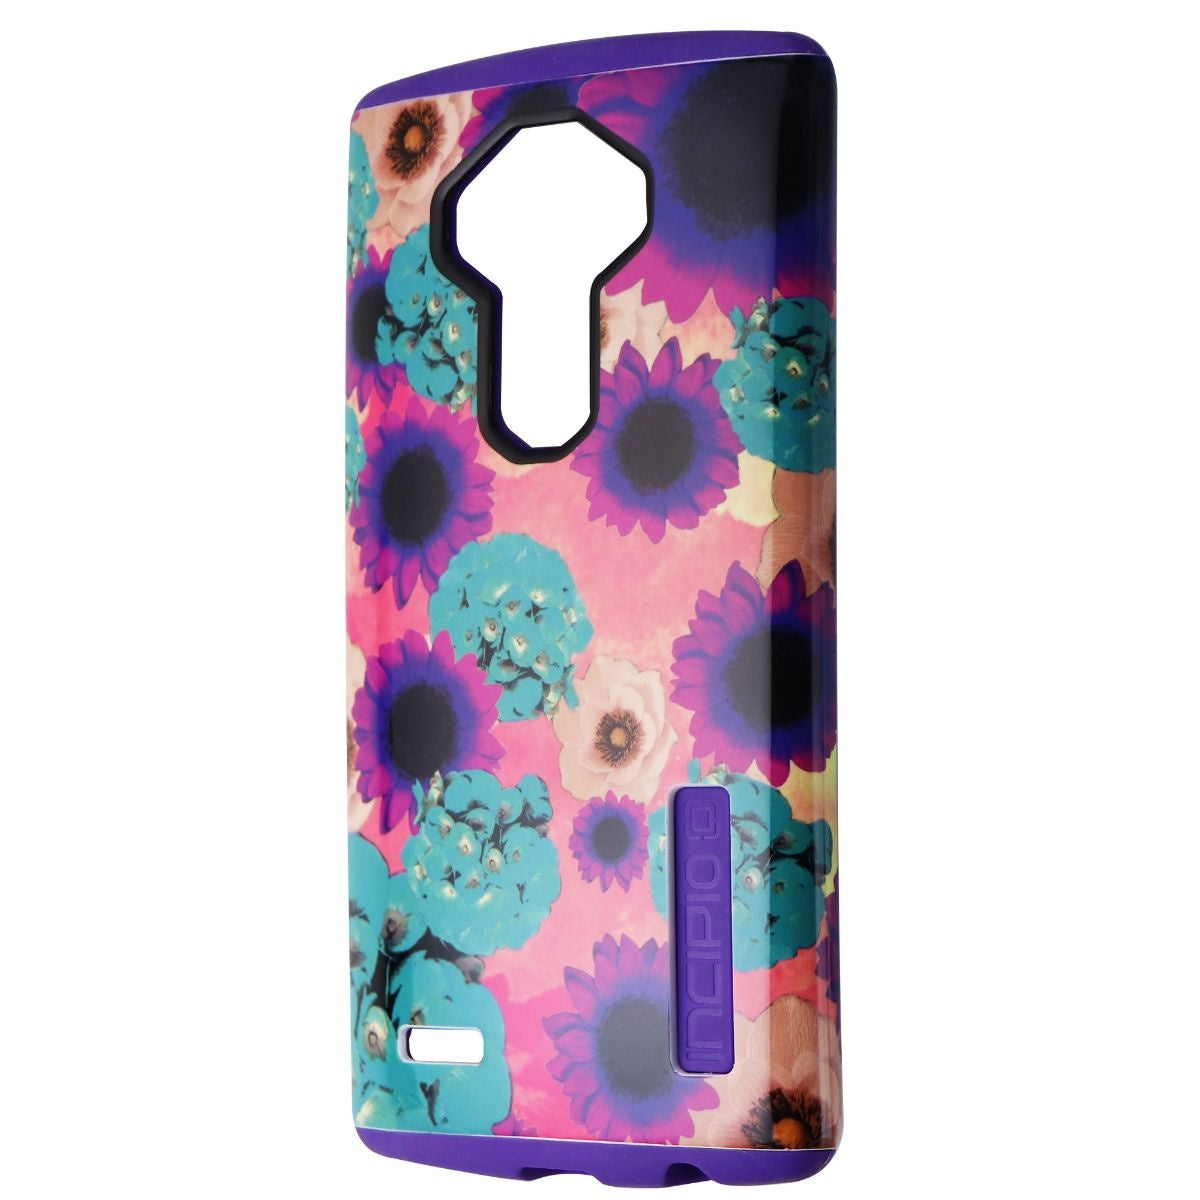 Incipio DualPro Series Dual Layer Case for LG G4 - Purple / Flowers Cell Phone - Cases, Covers & Skins Incipio    - Simple Cell Bulk Wholesale Pricing - USA Seller